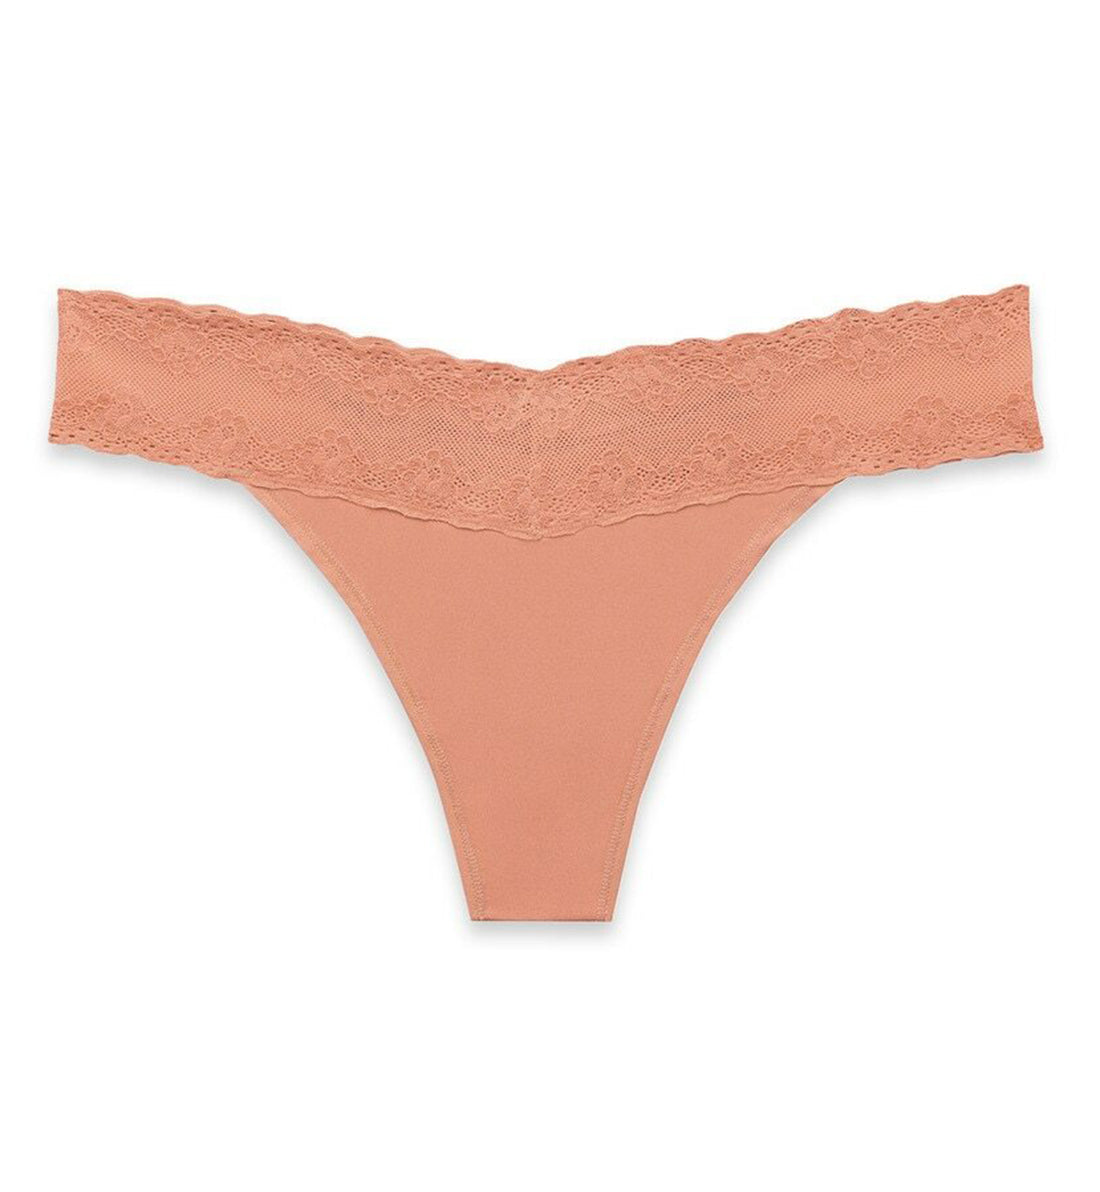 Natori Bliss Perfection Thong (750092),Frose - Frose,One Size